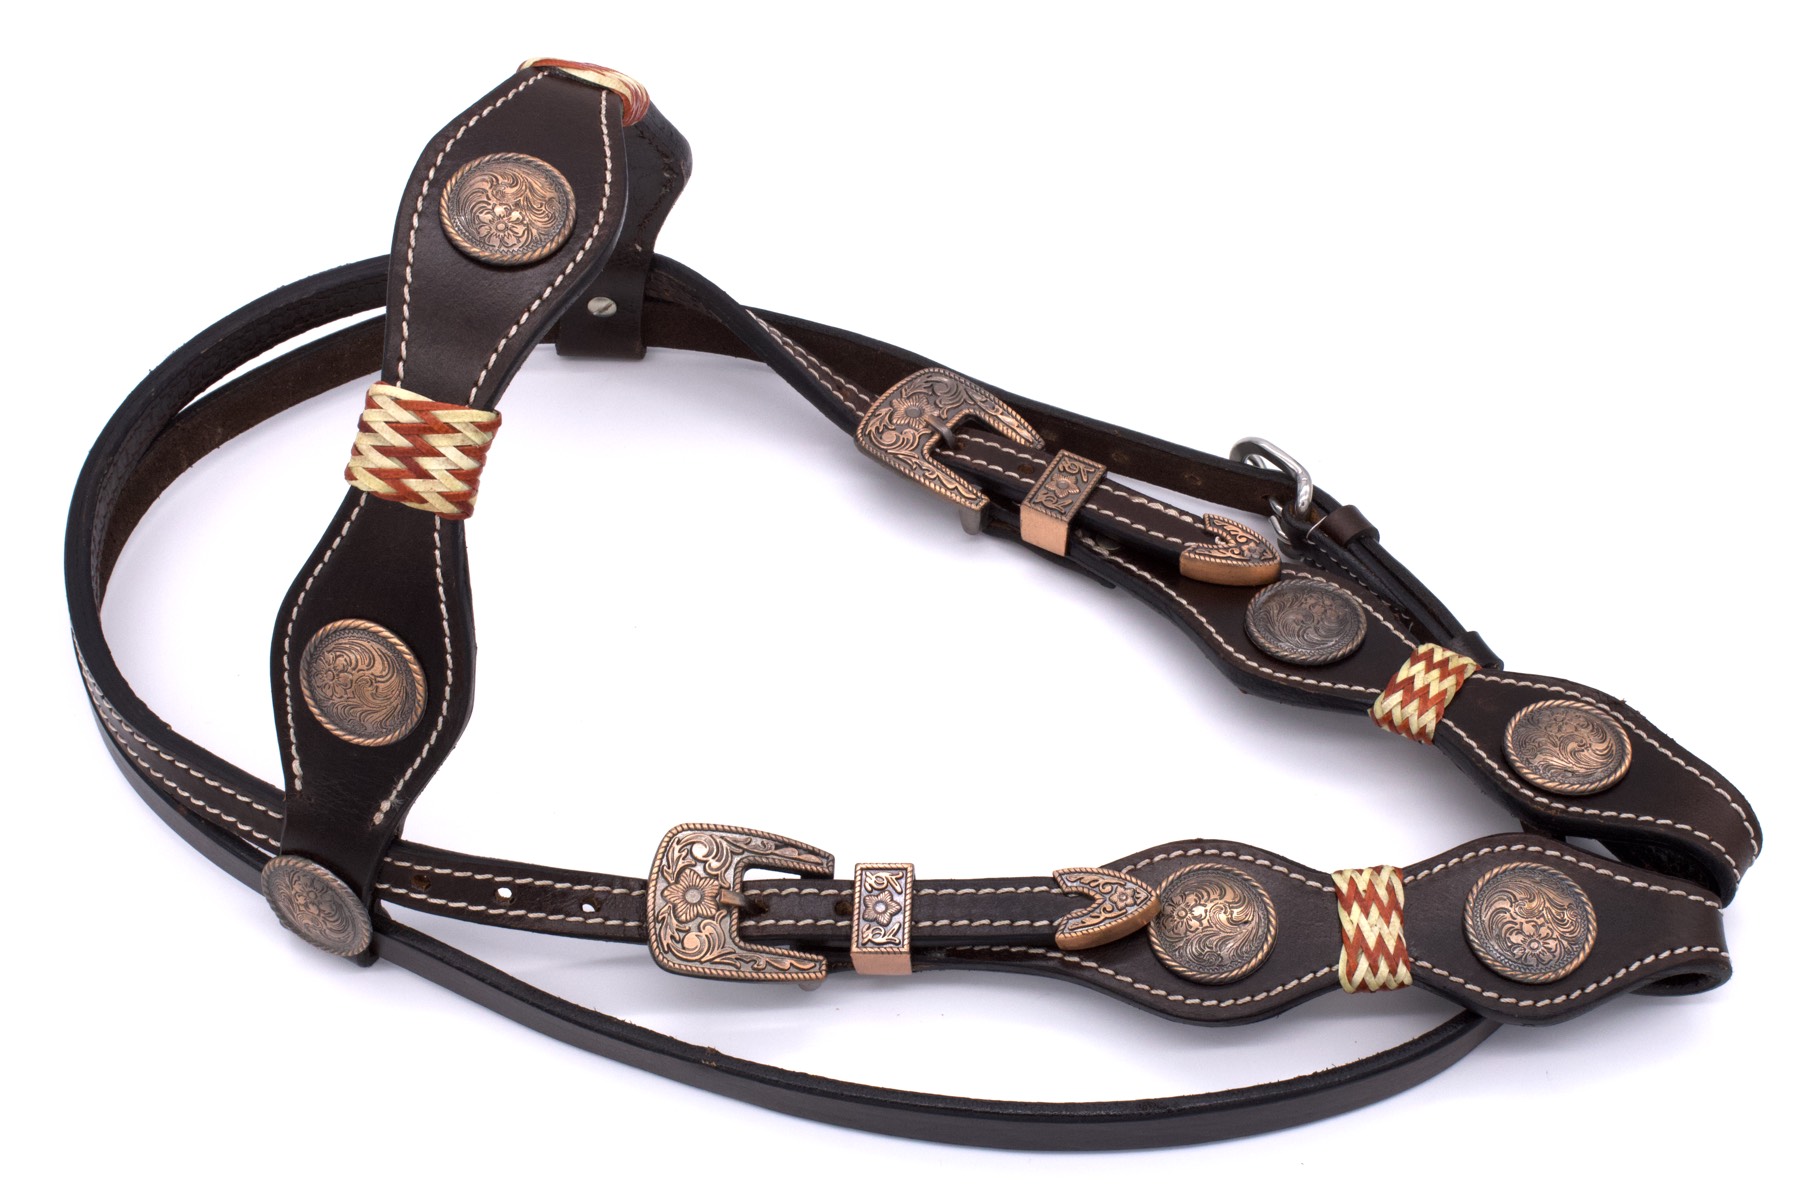 Vintage style western snaffle, copper coloured buckles and conchos, rawhide accents, browband